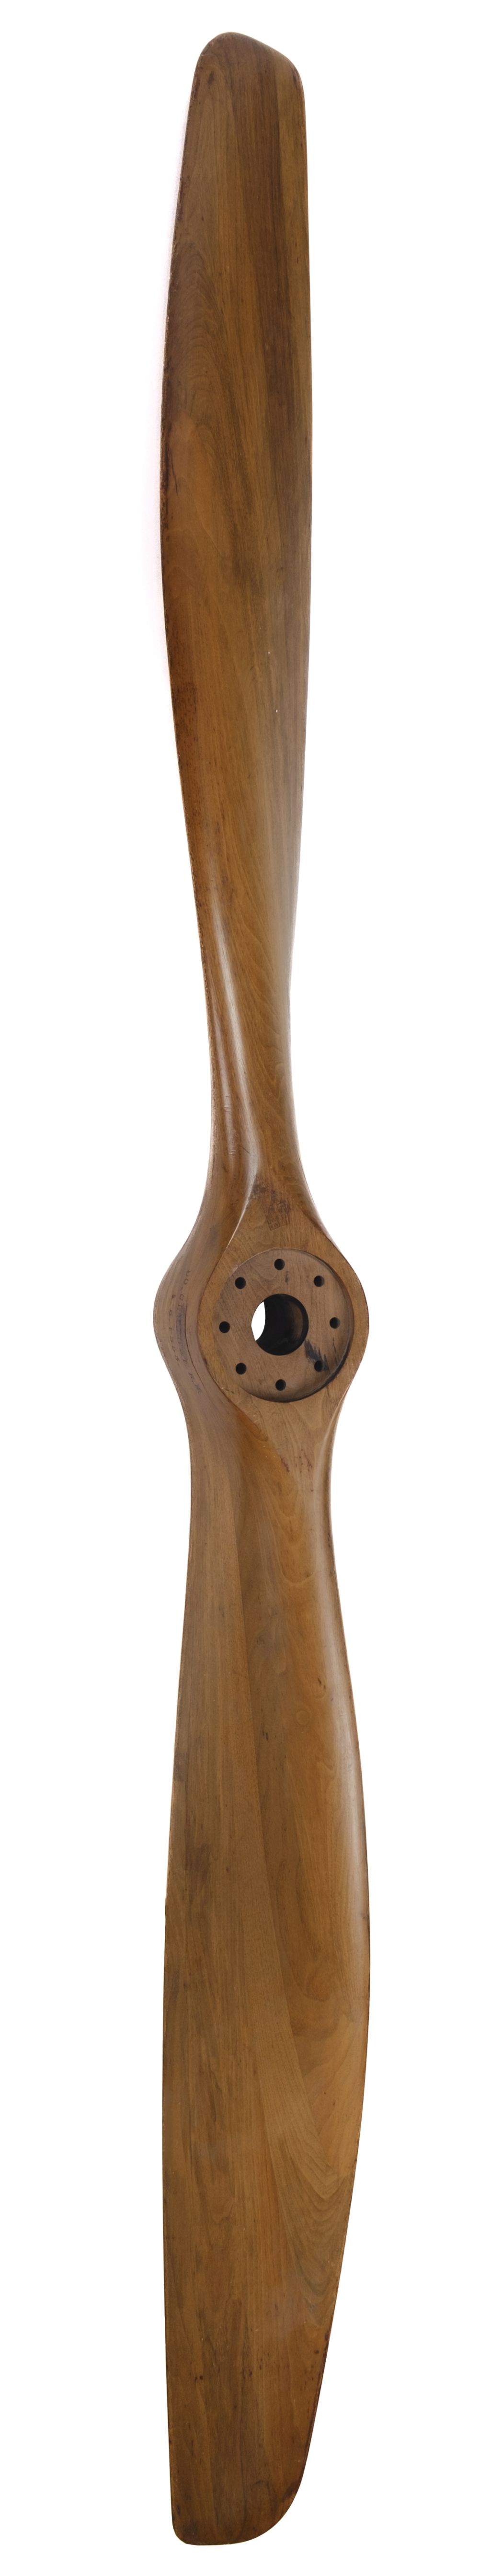 Propeller. French walnut two-blade propeller, early 20th century